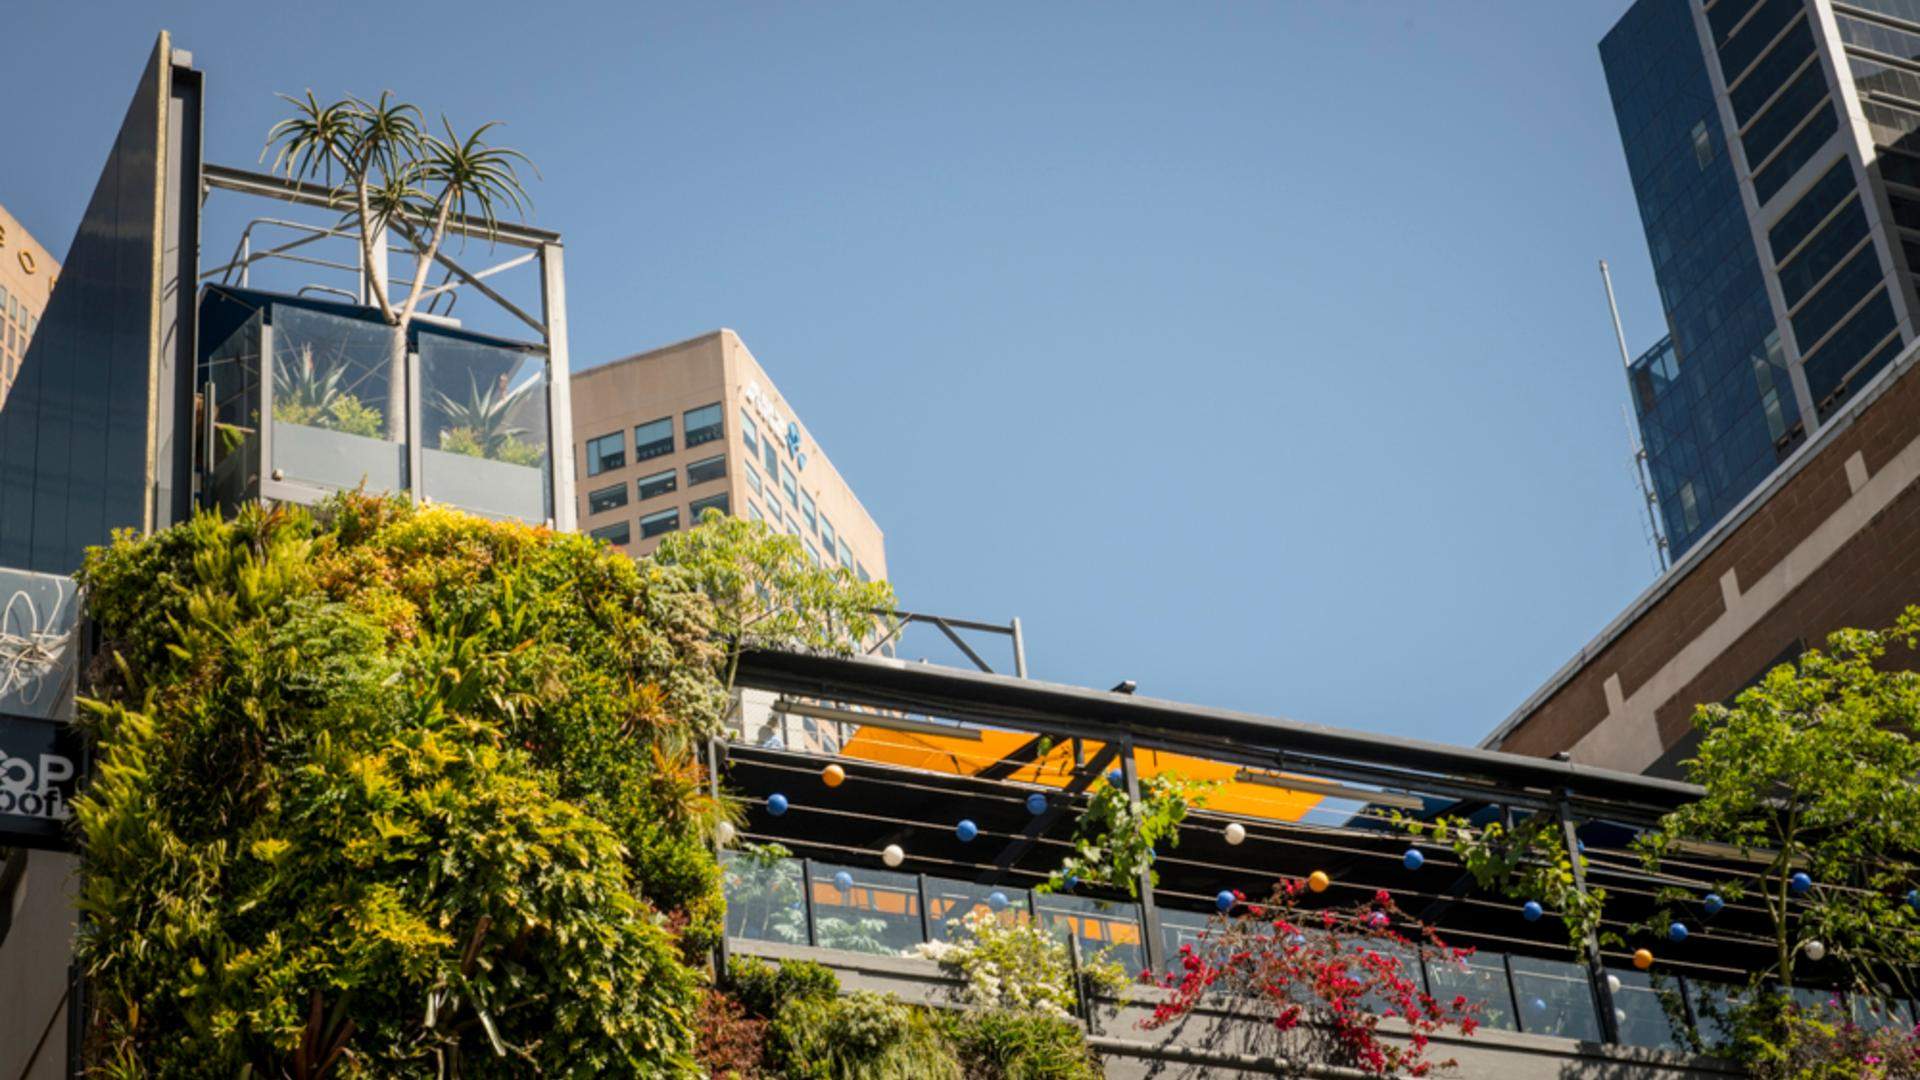 Loop Has Opened a Second Greenery-Filled Rooftop Bar in the CBD